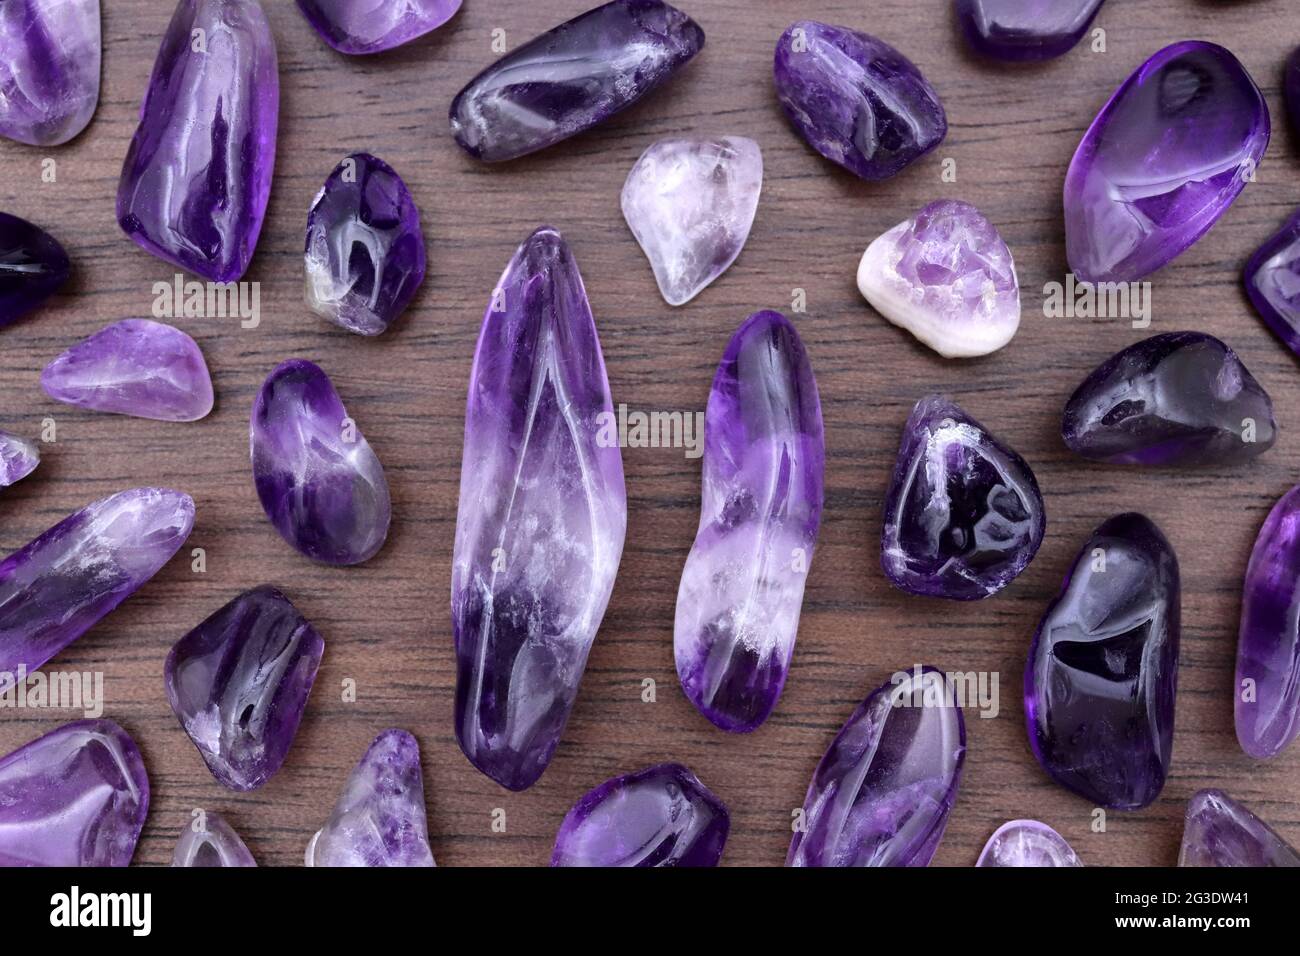 Amethyst rare jewel stones texture on brown varnished wood background Stock Photo